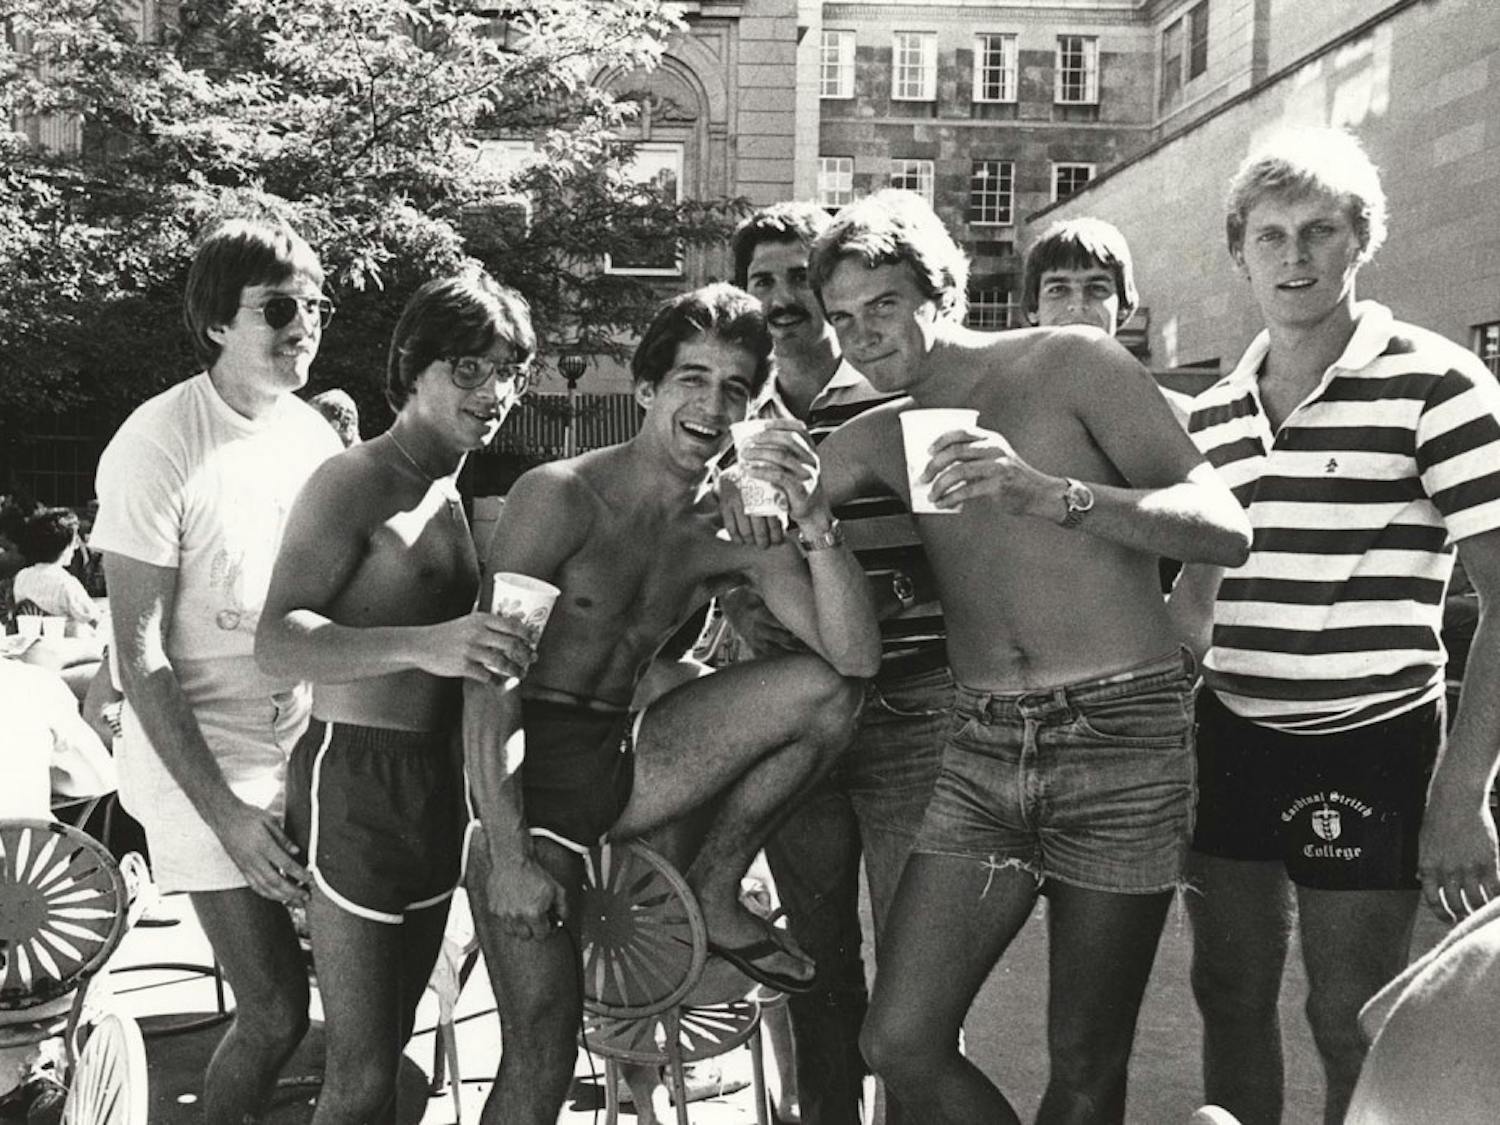 A group of guys in shorts, largely missing shirts, drink outside the Memorial Union.